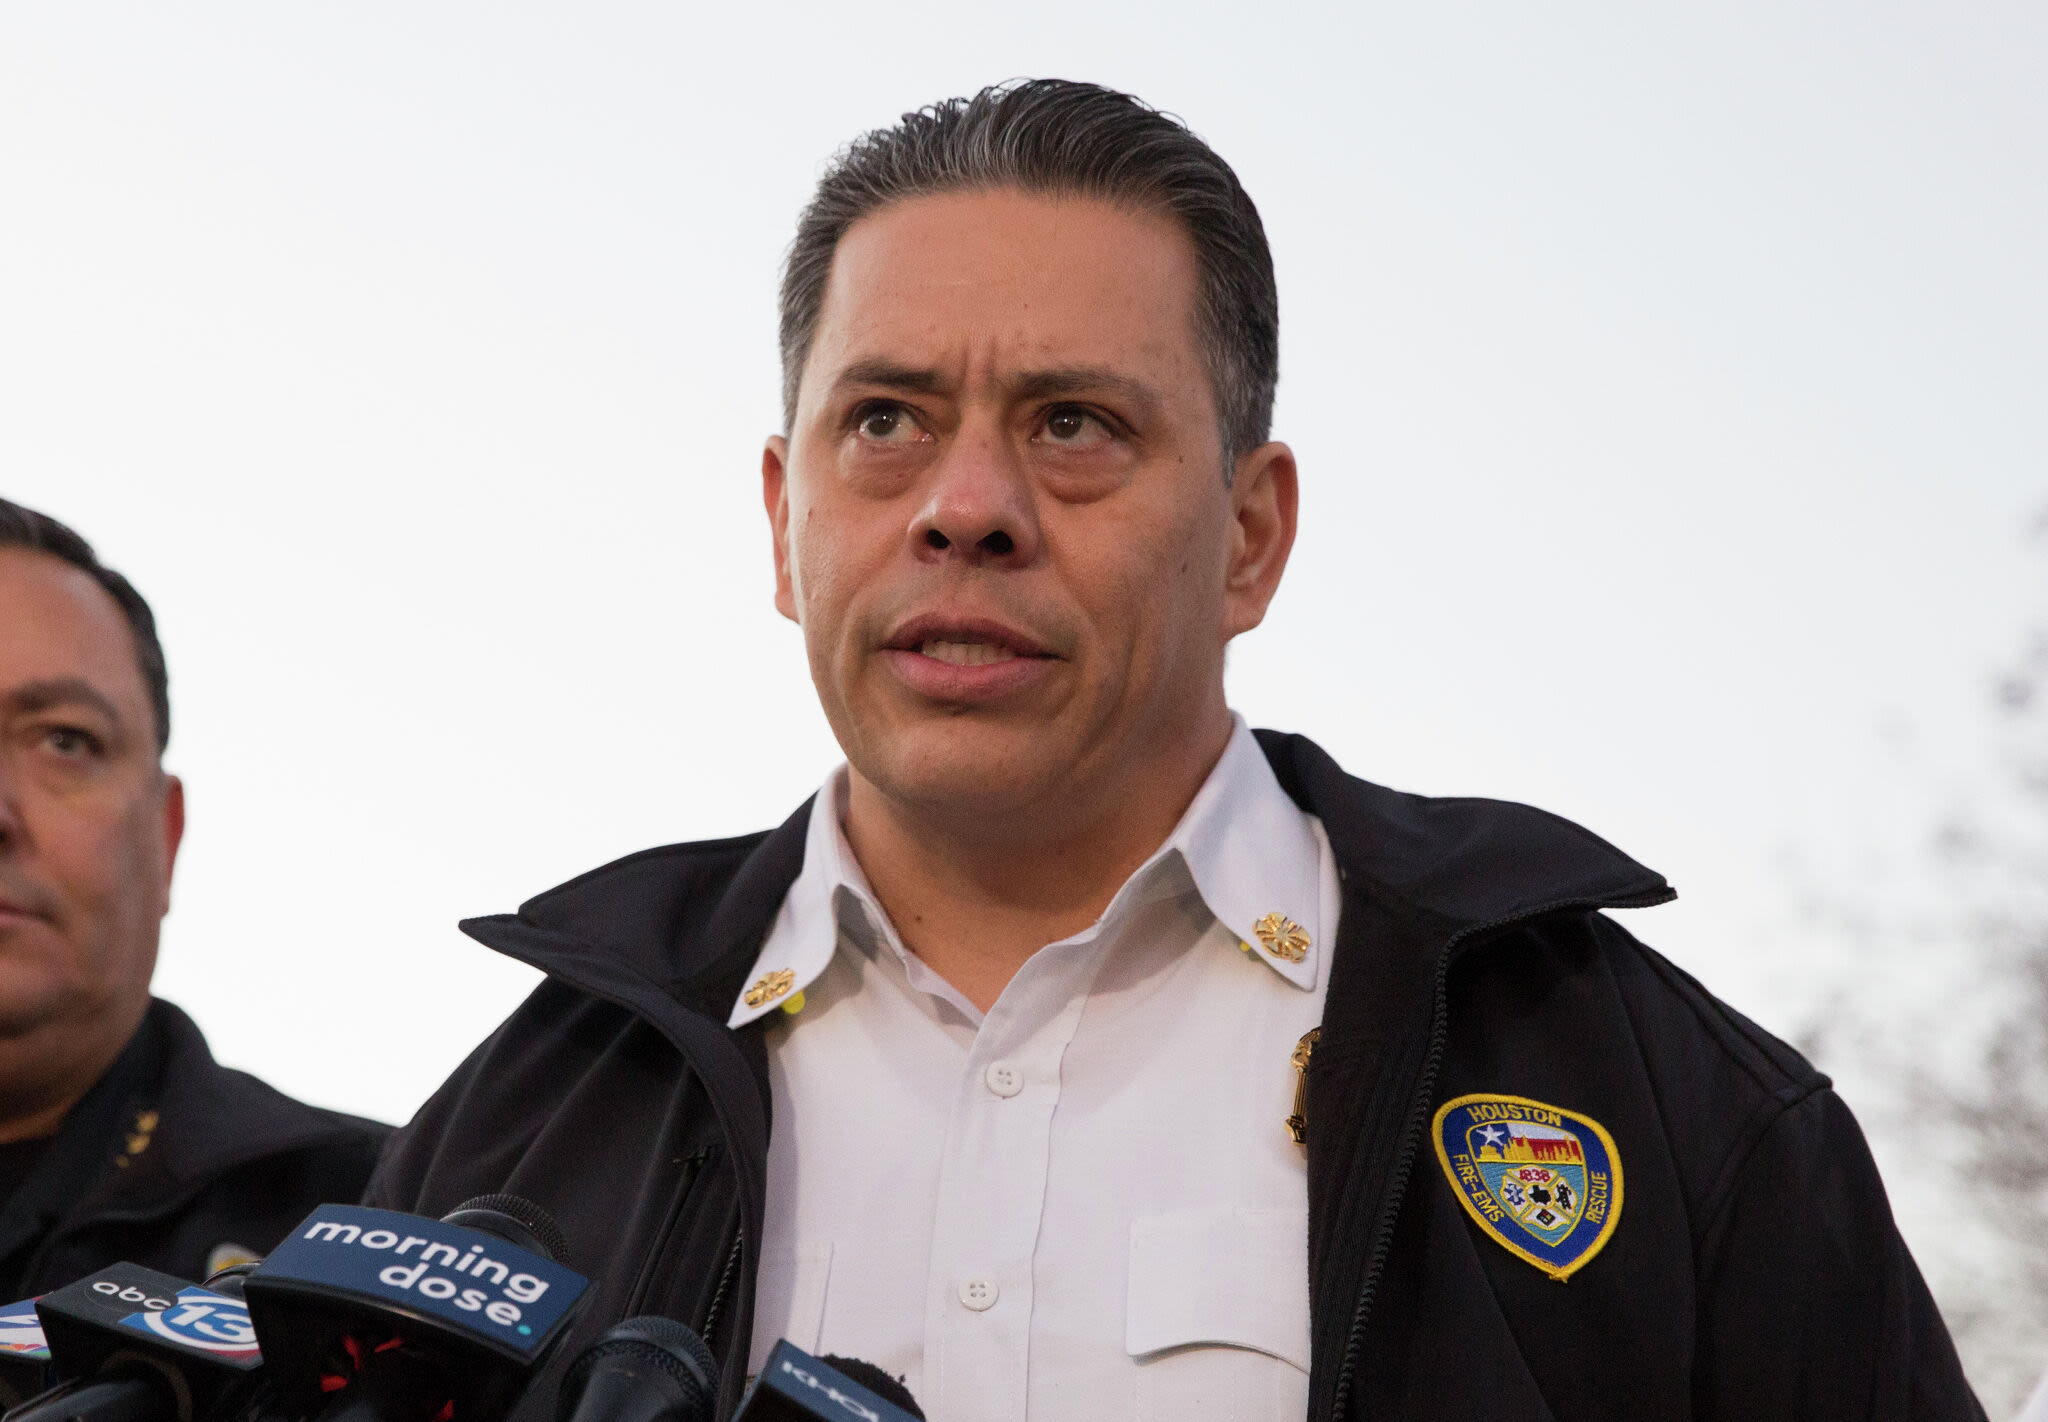 Houston Fire Chief Sam Peña is out, Mayor Whitmire confirms